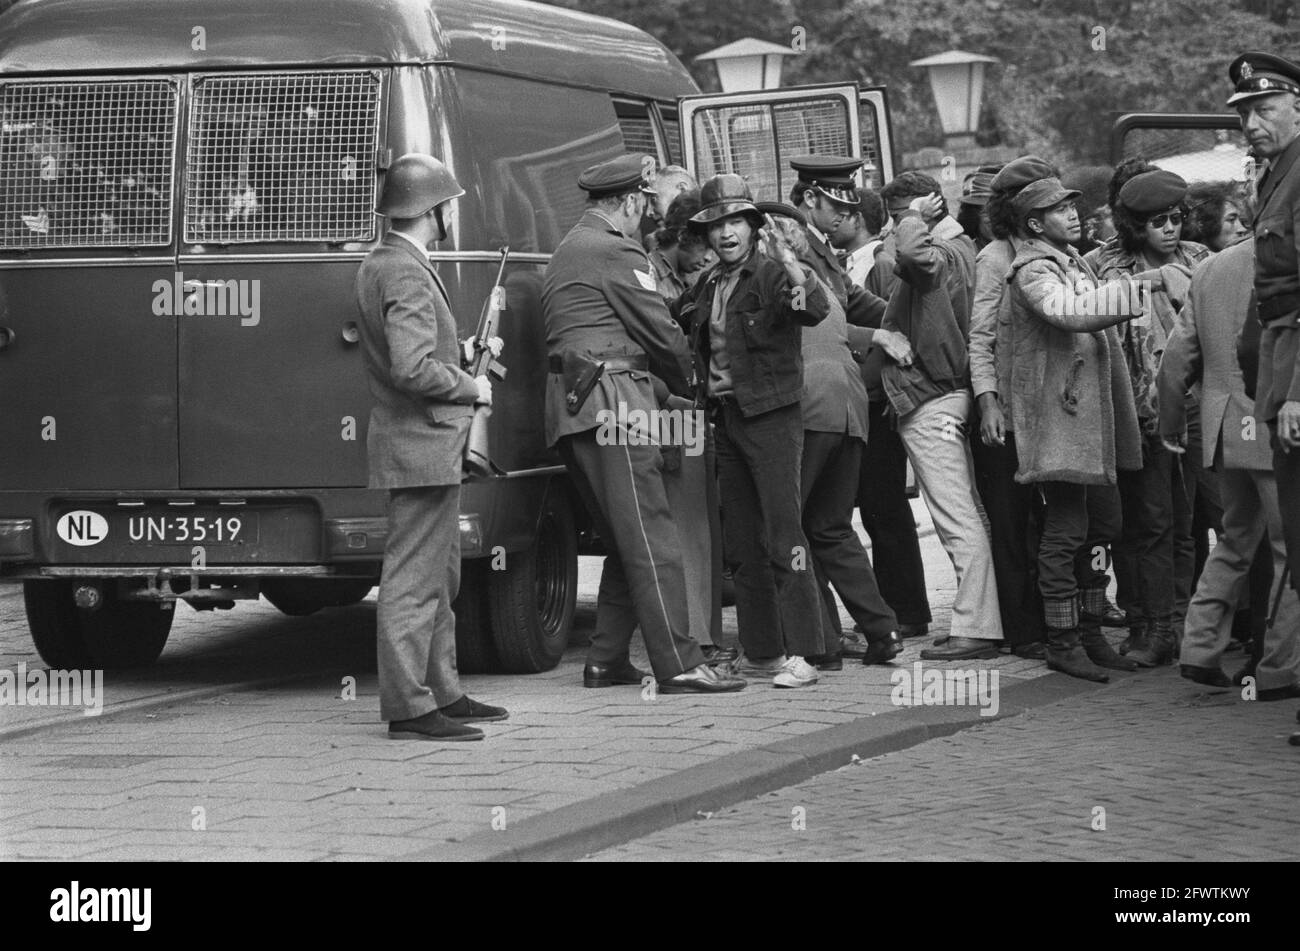 Ambonese occupy home Indonesian Ambassador, Wassenaar; Ambonese are searched before entering police car, August 31, 1970, Ambonese, police cars, The Netherlands, 20th century press agency photo, news to remember, documentary, historic photography 1945-1990, visual stories, human history of the Twentieth Century, capturing moments in time Stock Photo